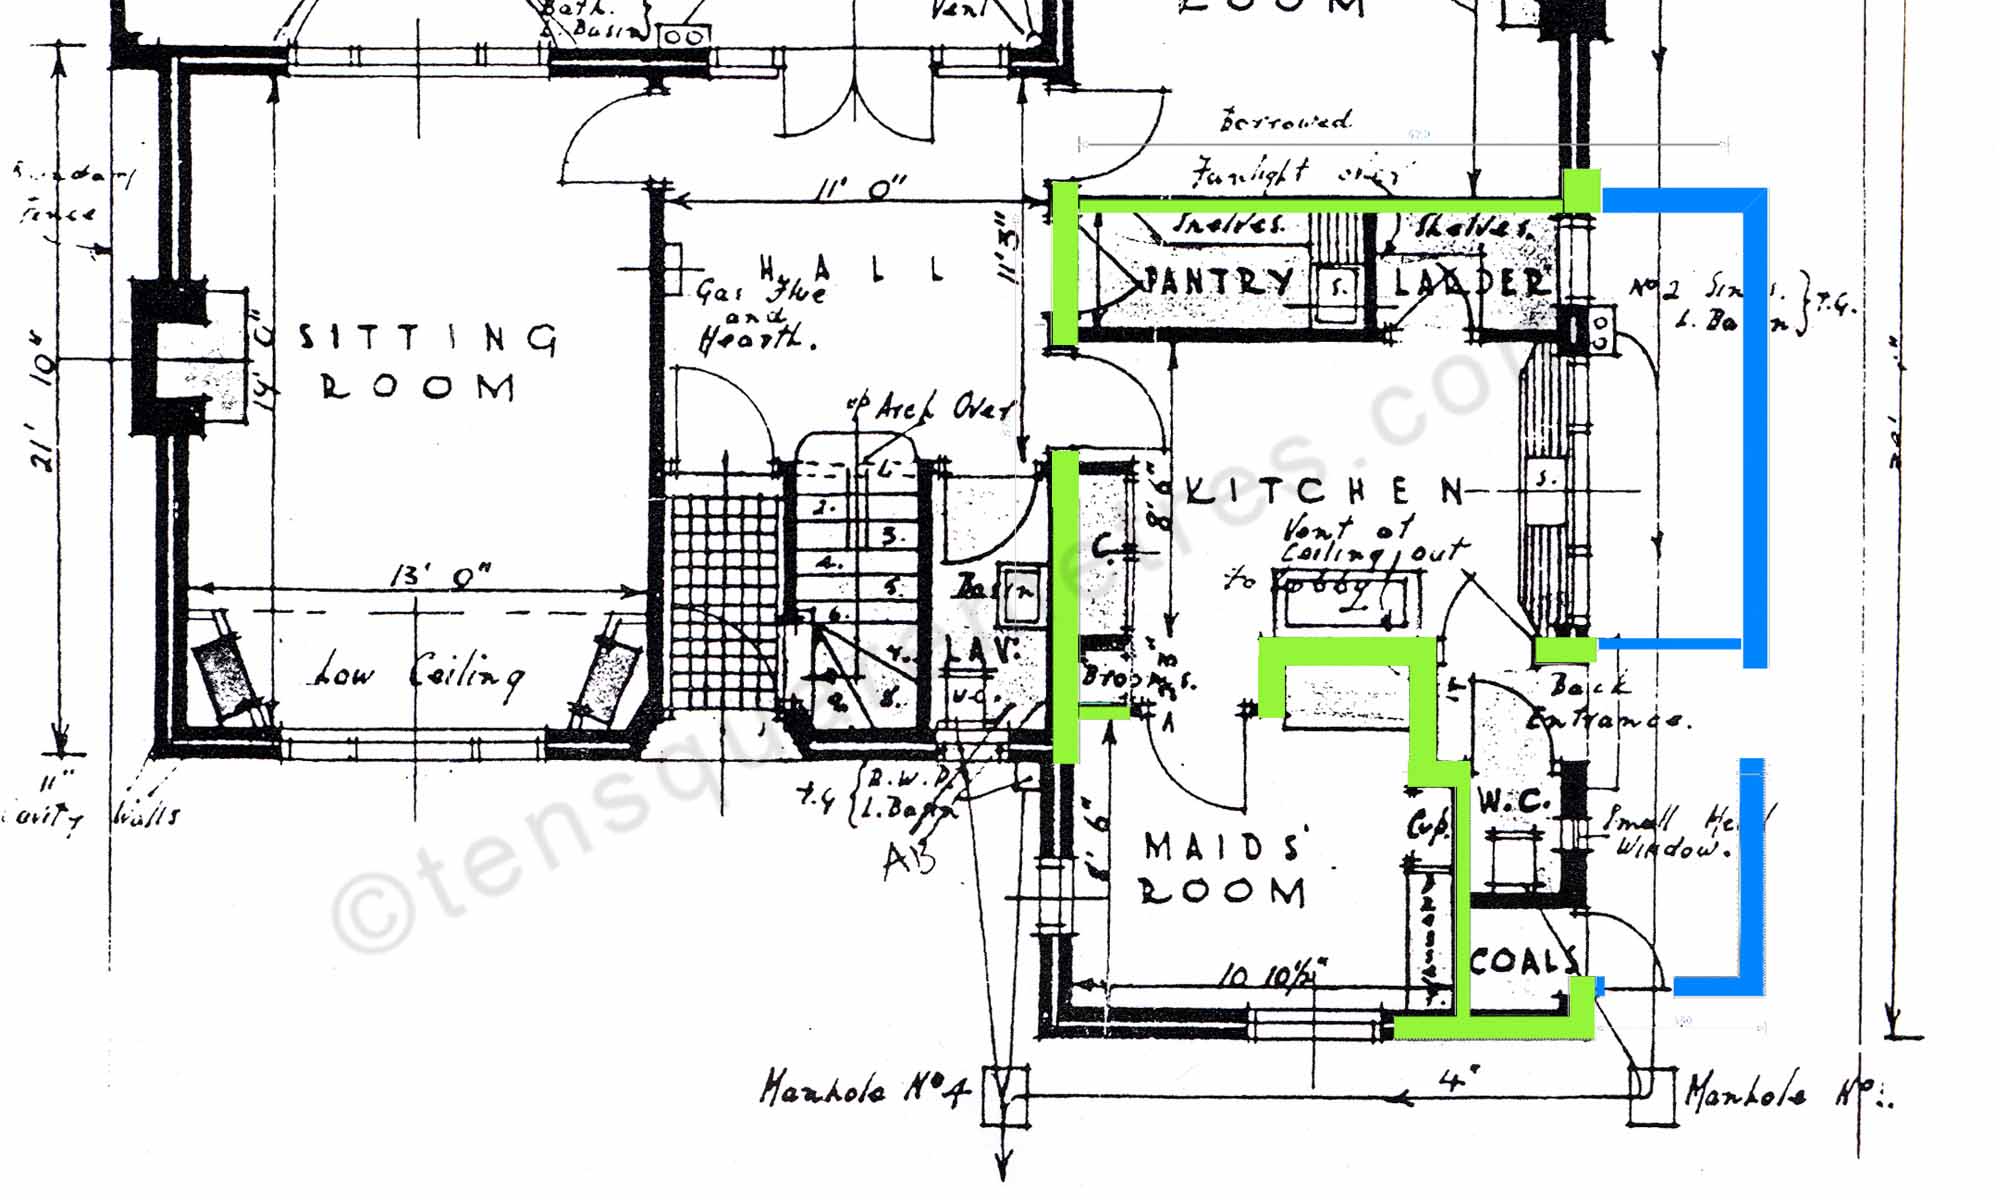 old plan of 1920s house